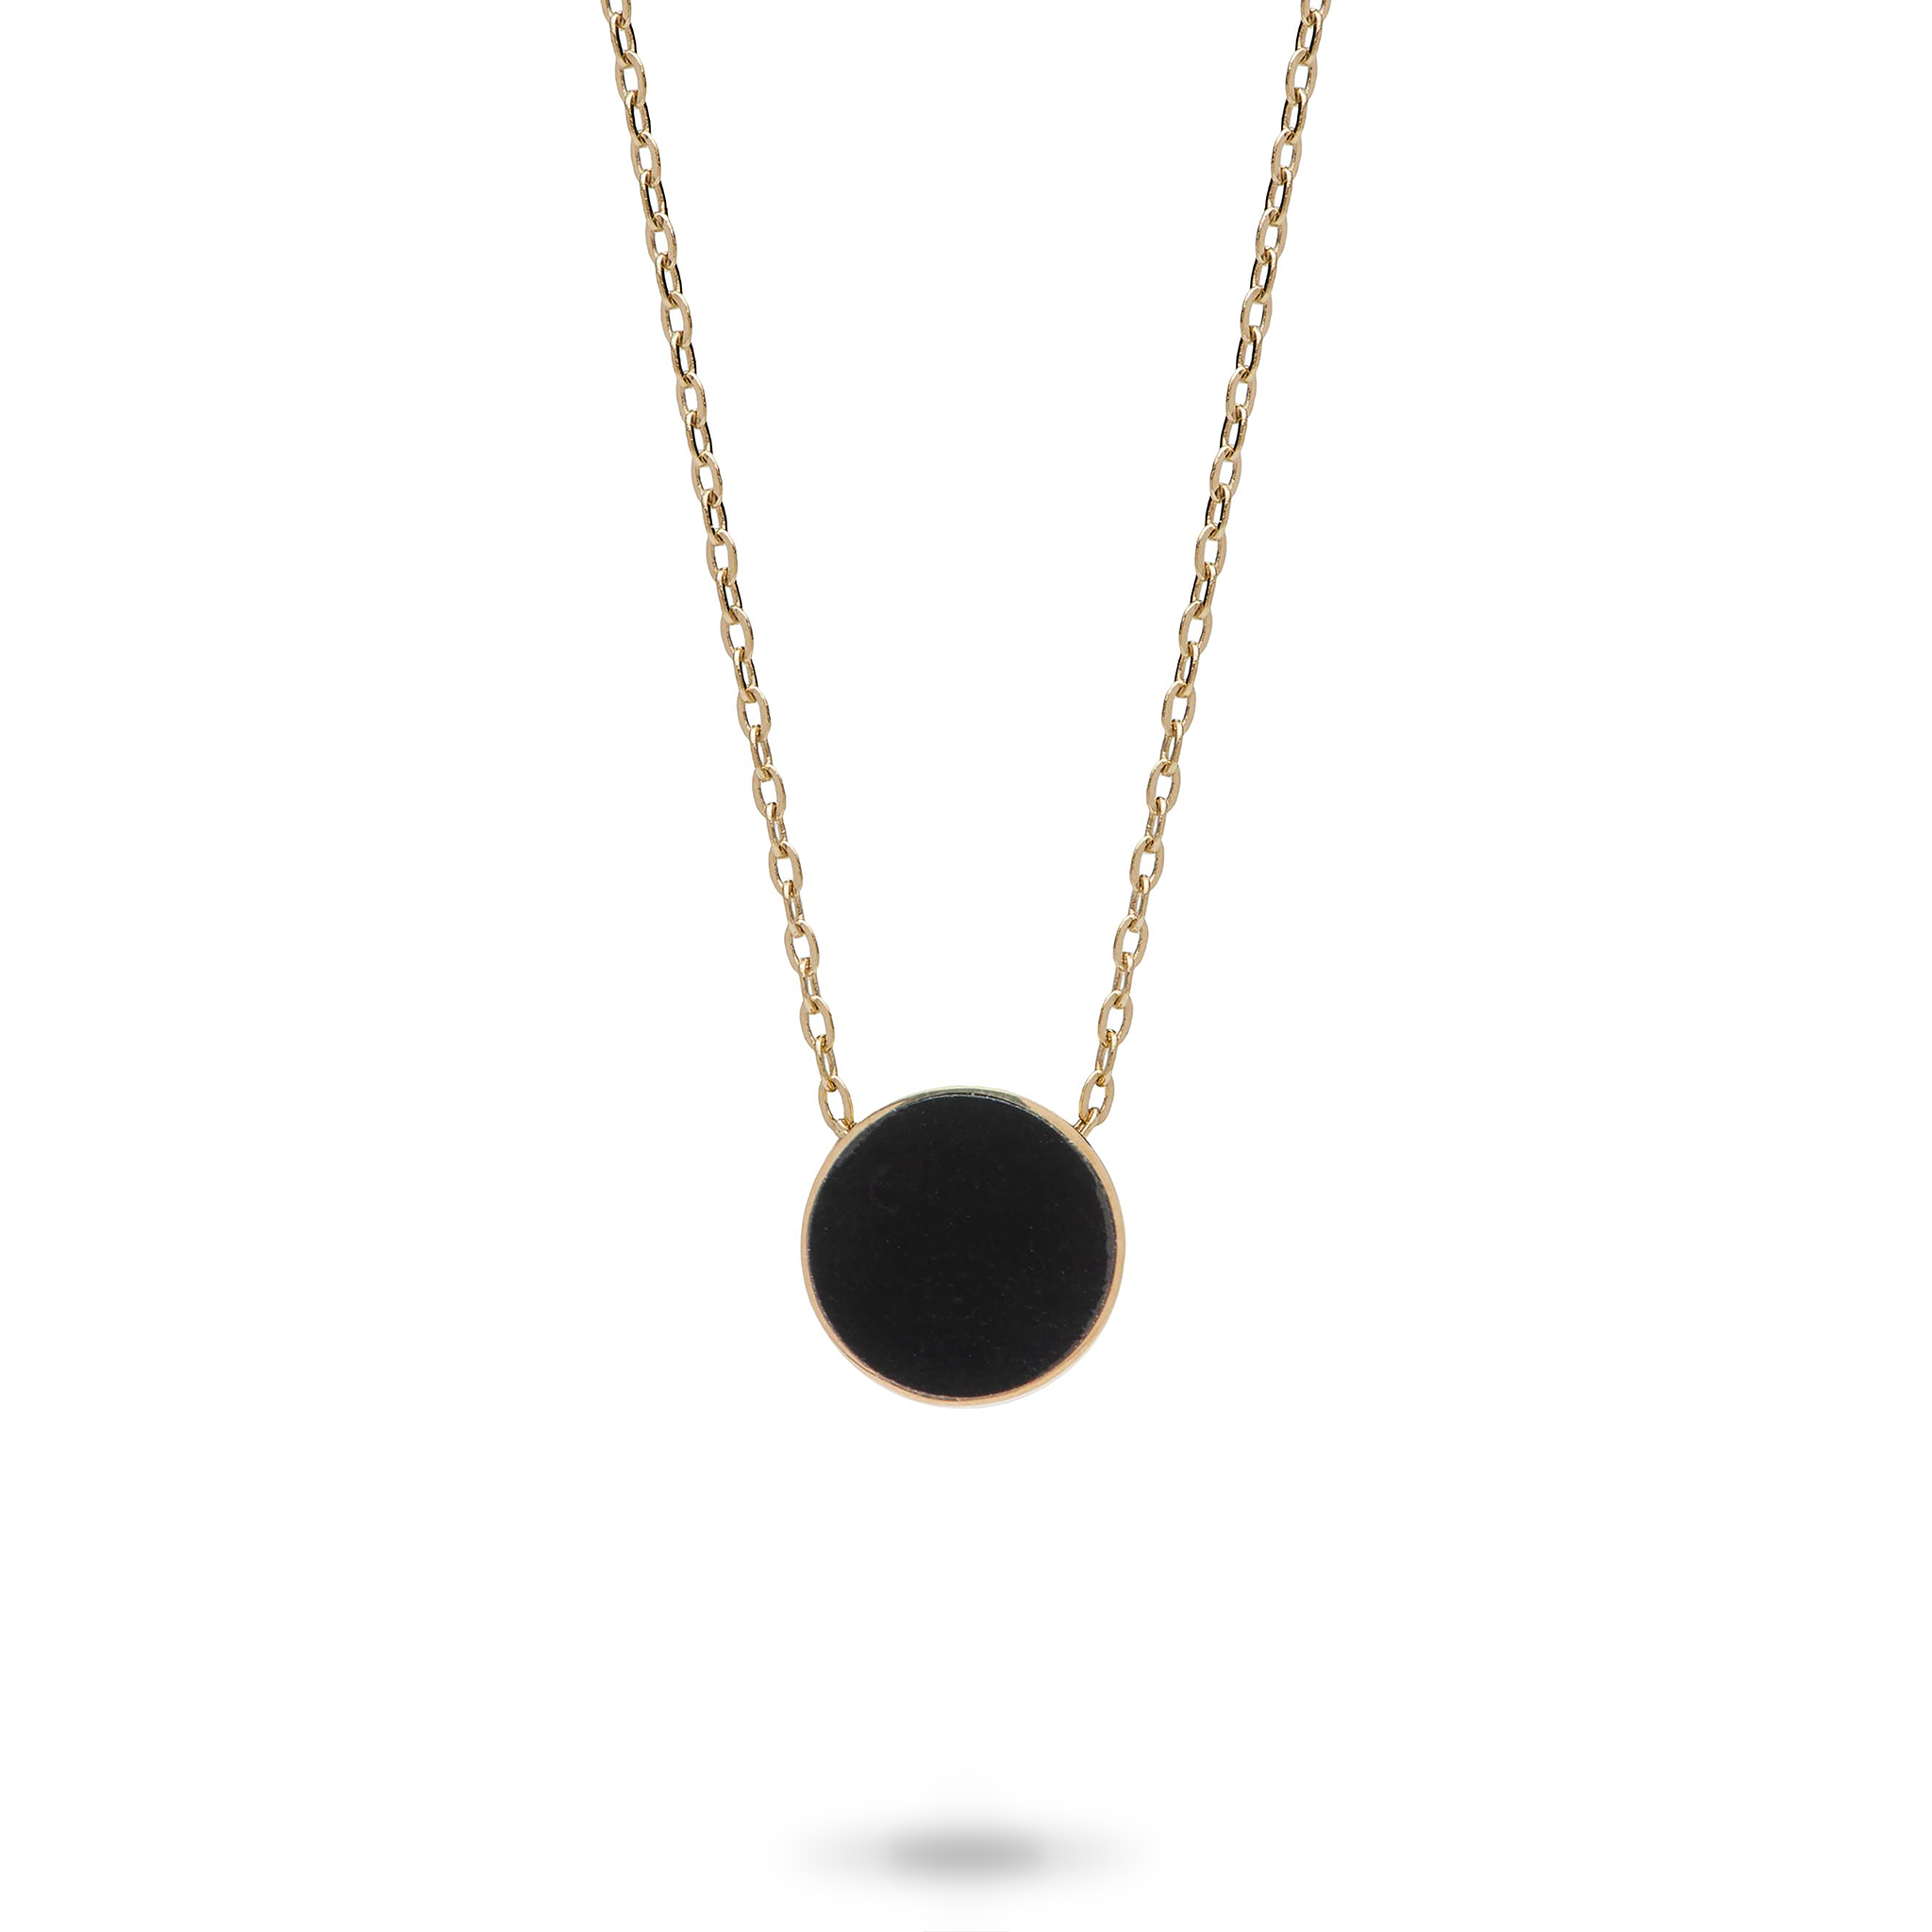 16-18" Adjustable Eclipse Flipside Black Coral & Mother of Pearl Necklace in Gold - 9mm